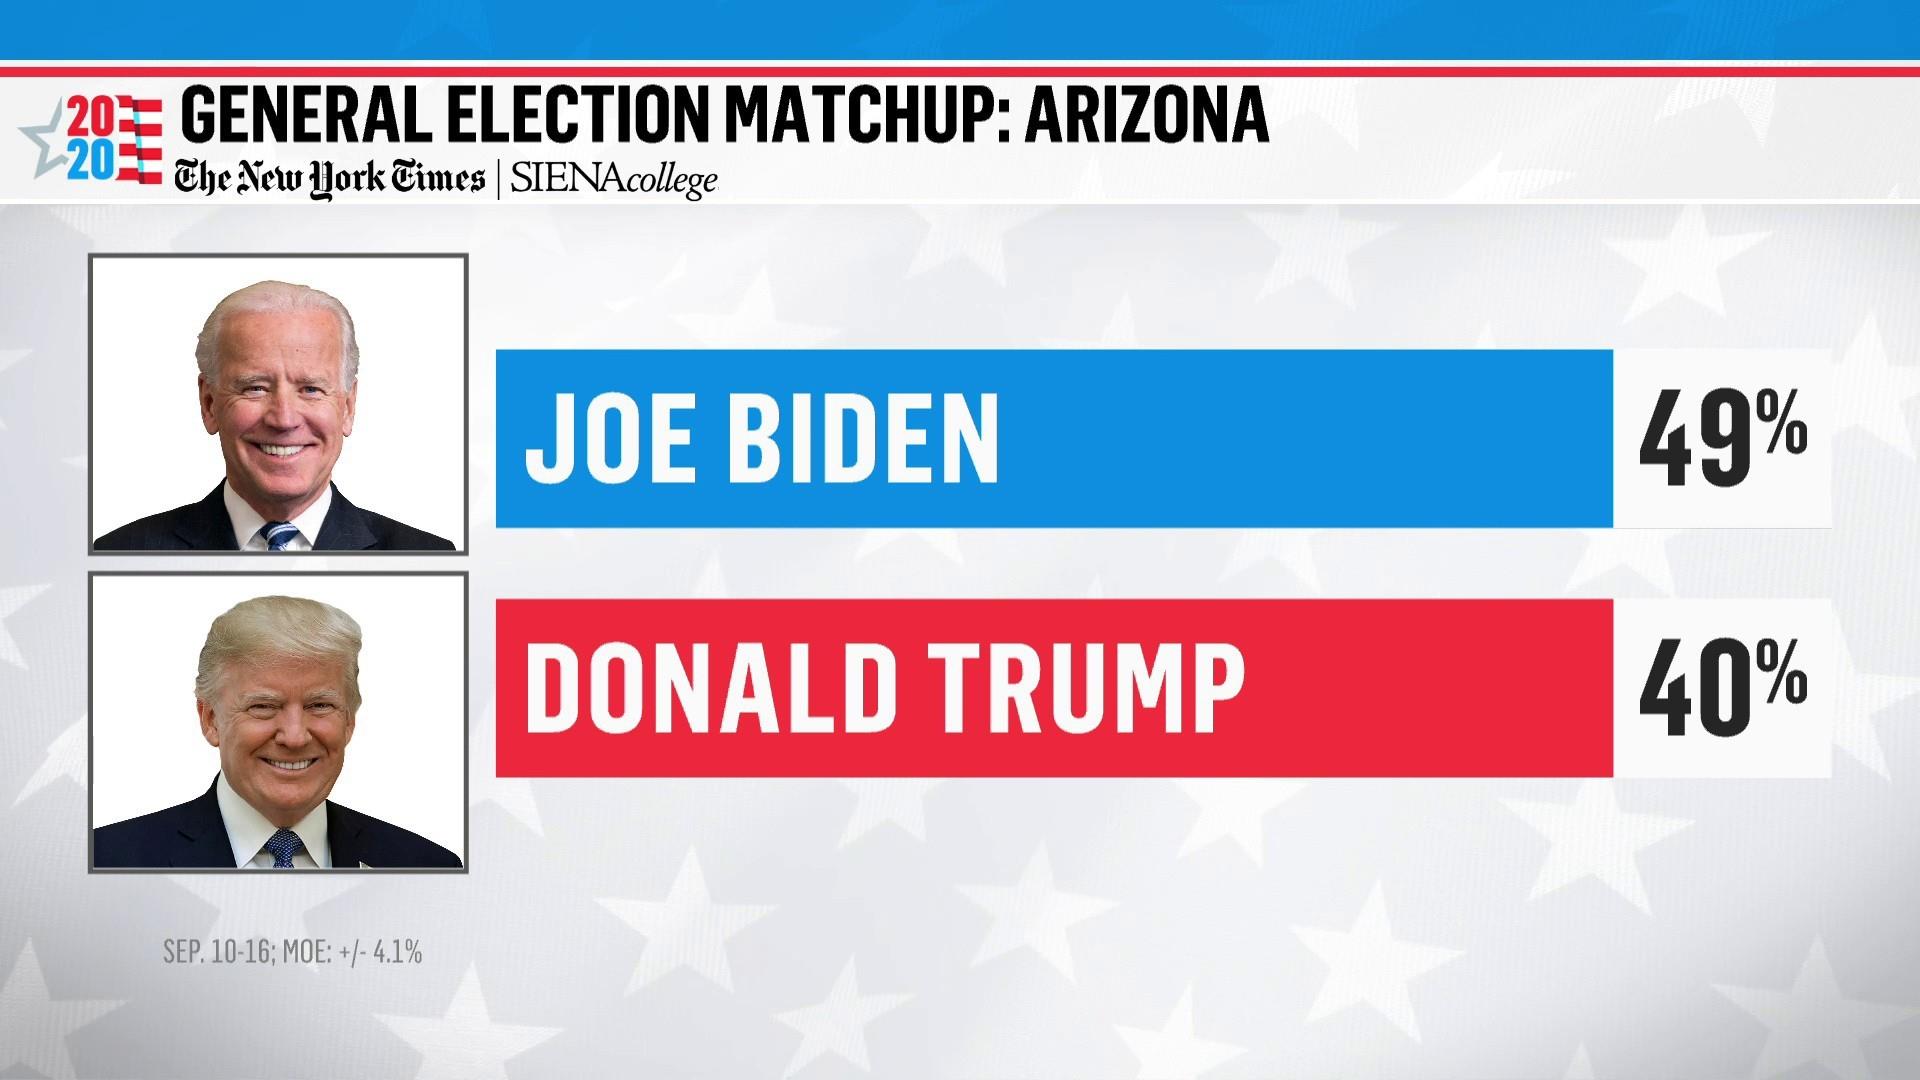 ristet brød Colonial skibsbygning Biden has Ohio back in play. But voters in once-Democratic strongholds keep  faith in Trump.